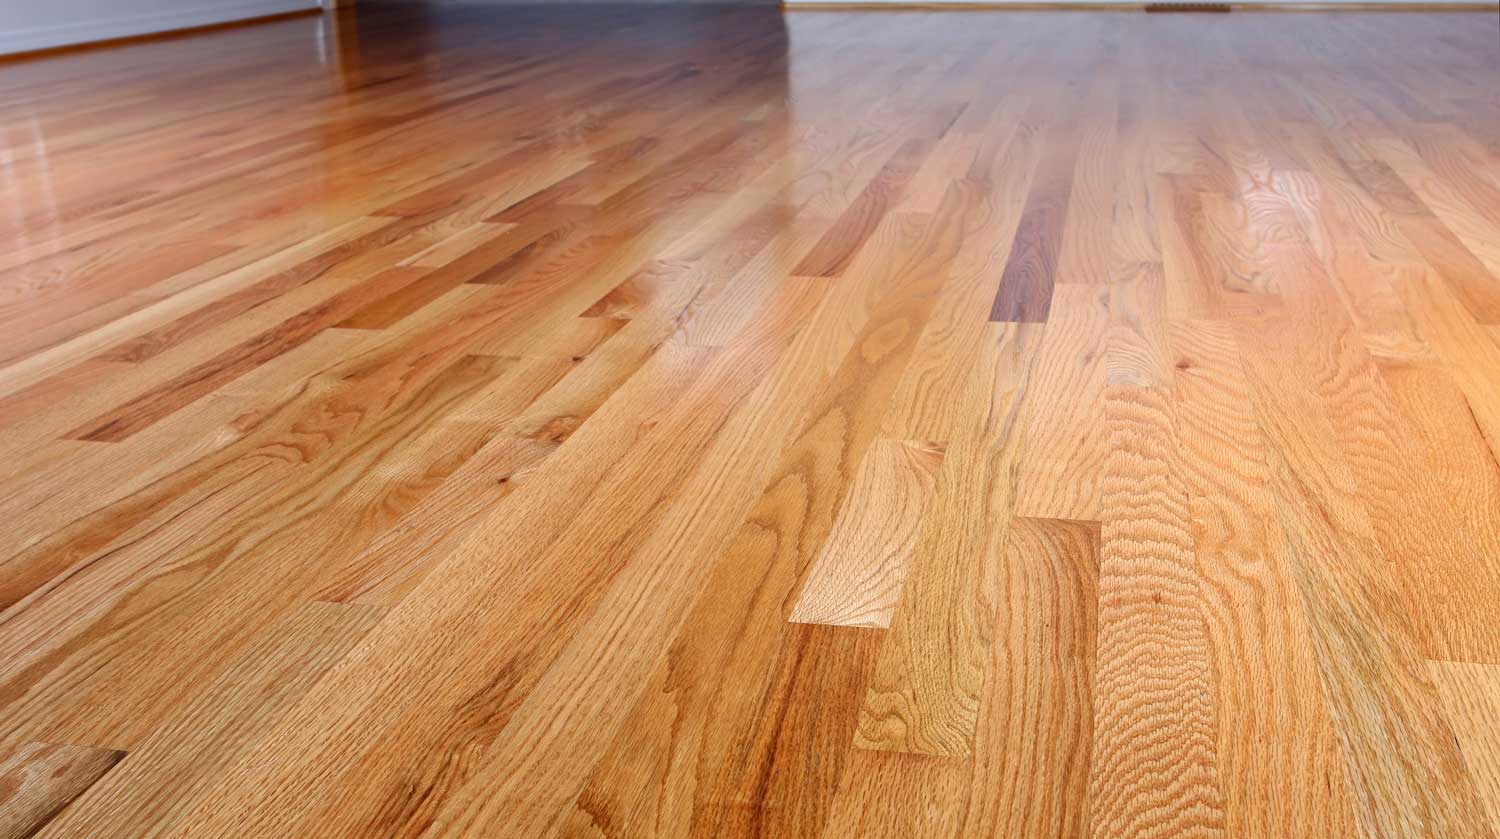 Cost To Refinish A Hardwood Floor, How Much Does It Cost To Install 1500 Square Feet Of Hardwood Floors